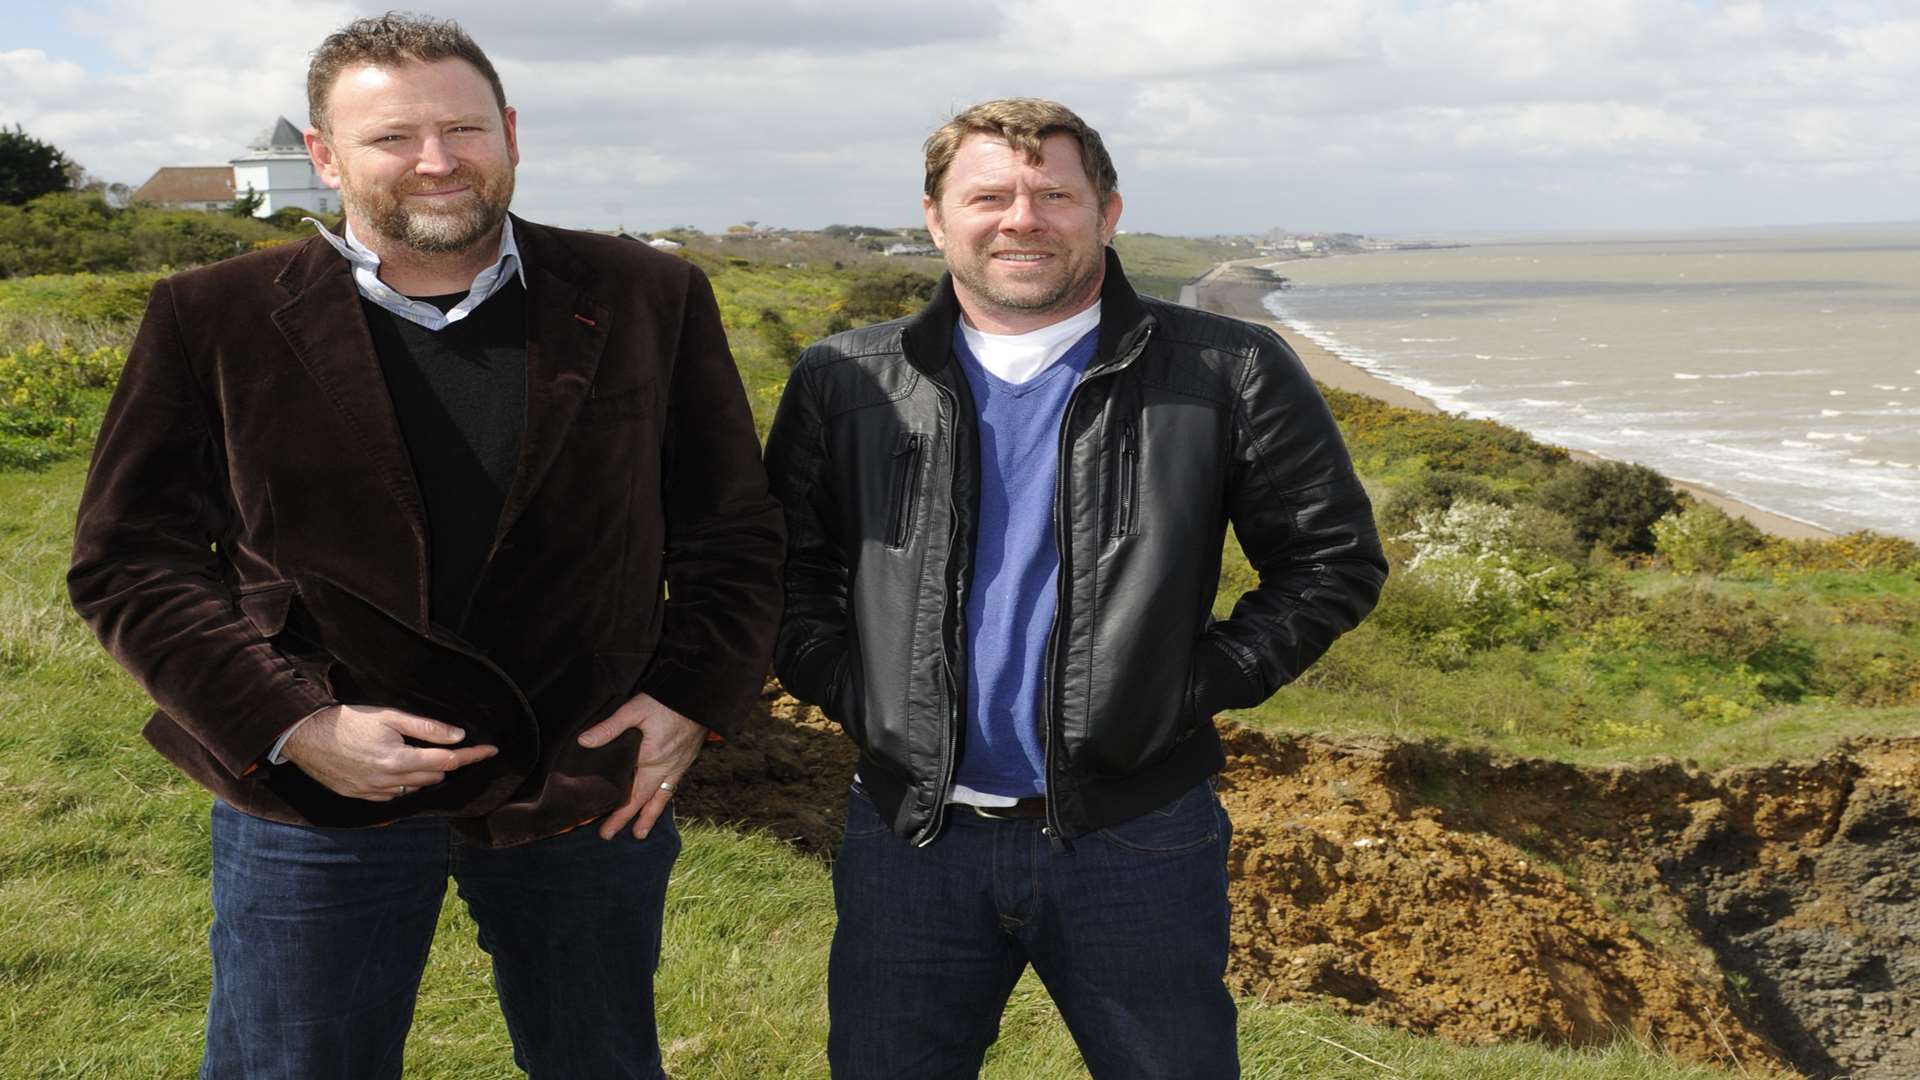 Jason Hollingsworth and Phillip Long want to put Kinetic sculptures along the seafront